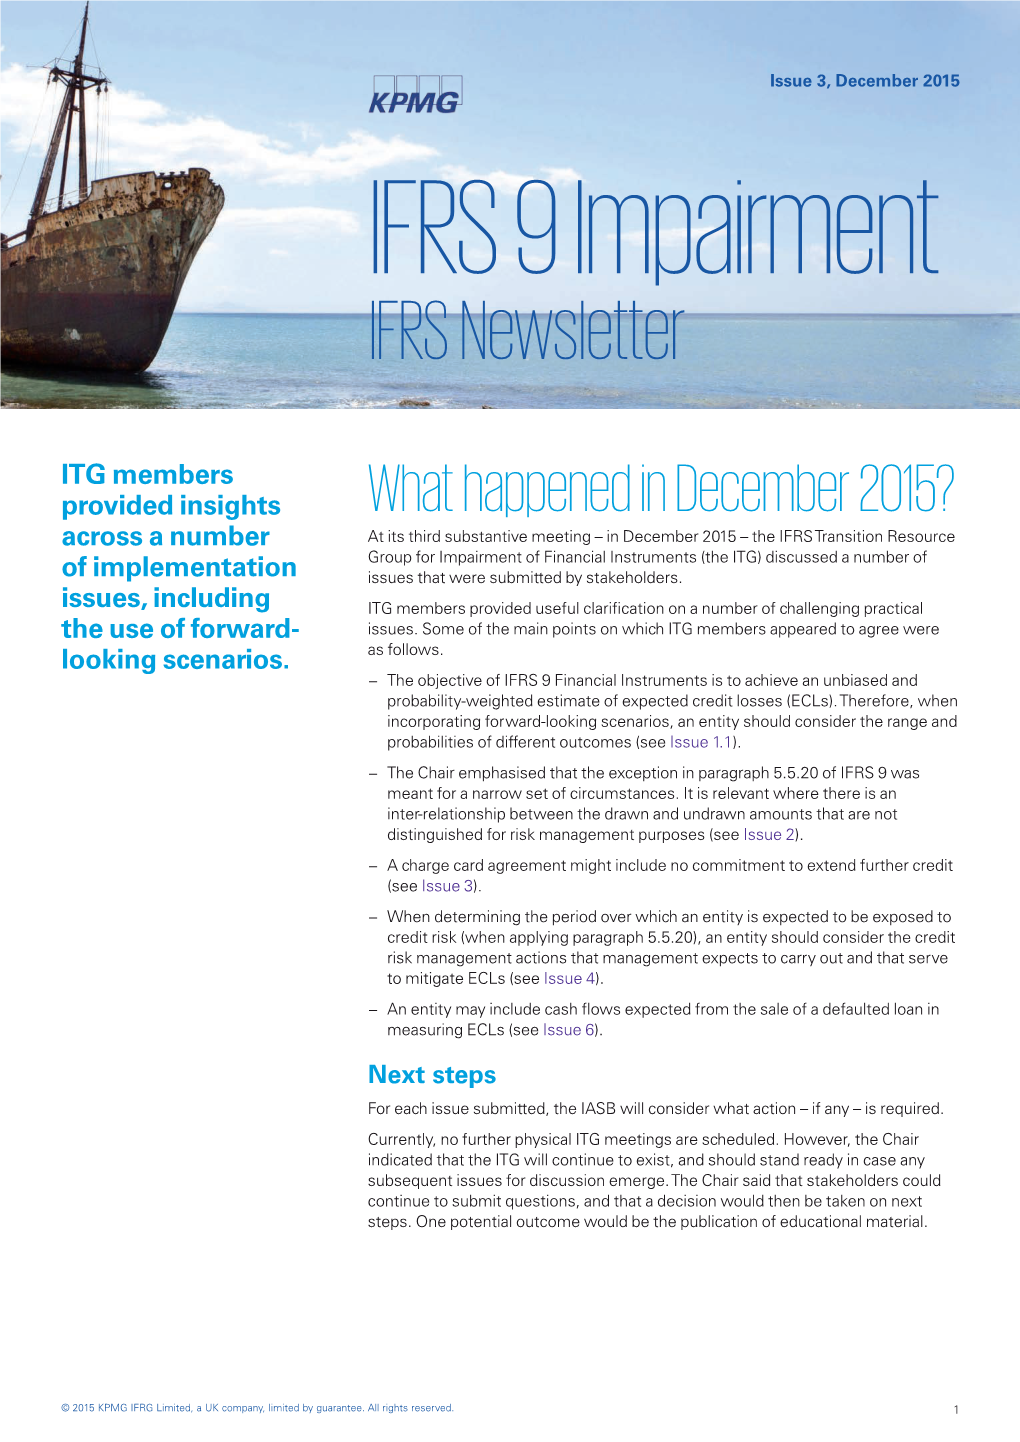 IFRS Newsletter: IFRS 9 Impairment, Issue 3, December 2015